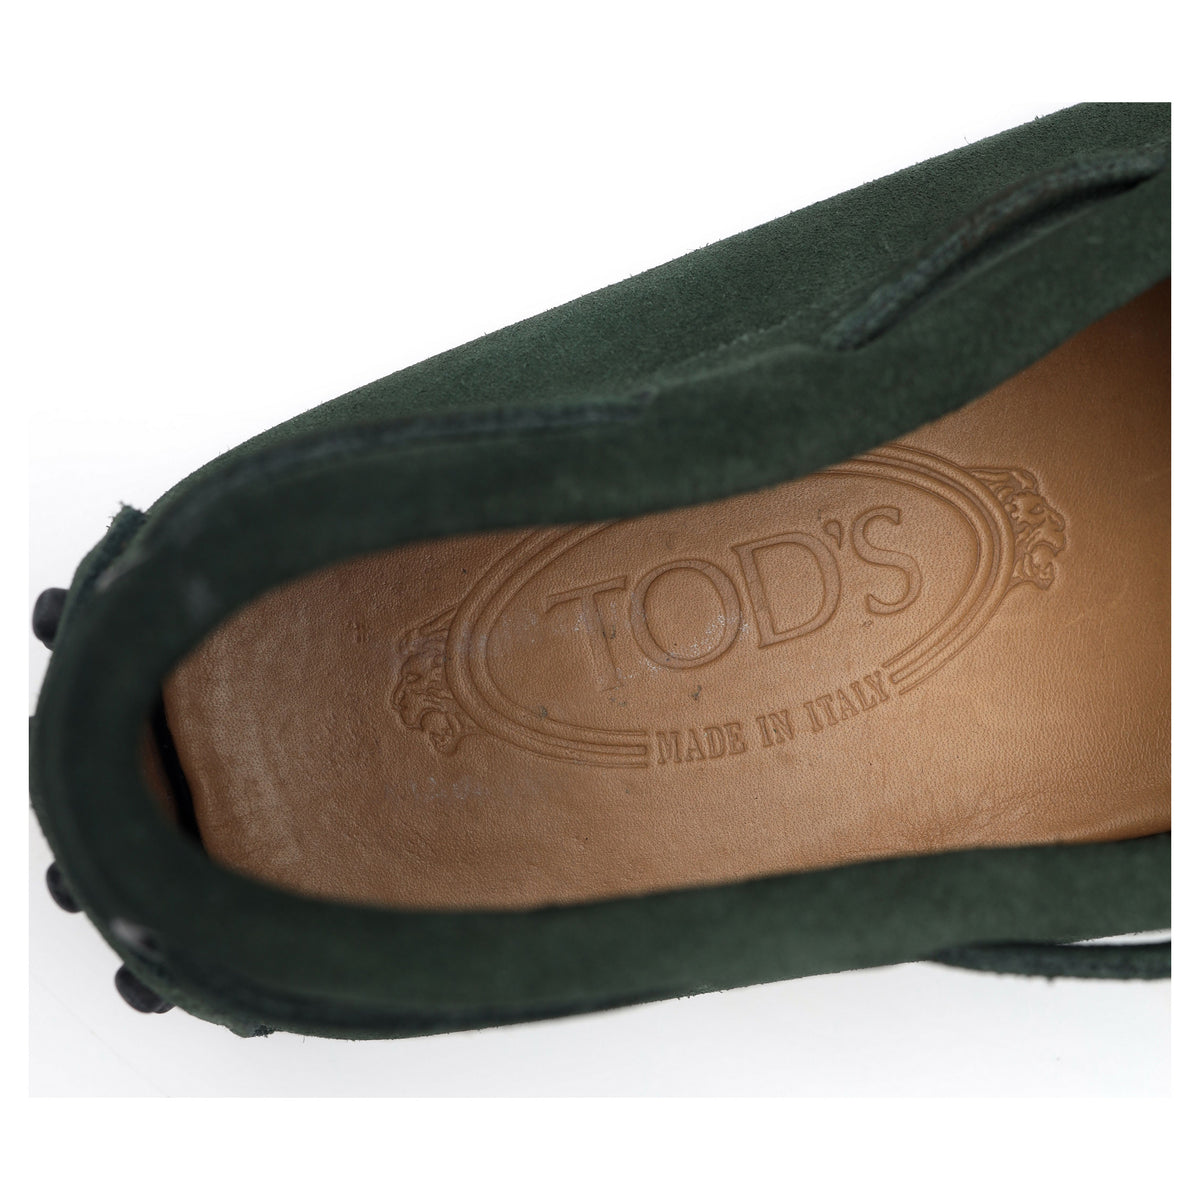 Gommino Green Suede Driving Loafers UK 6